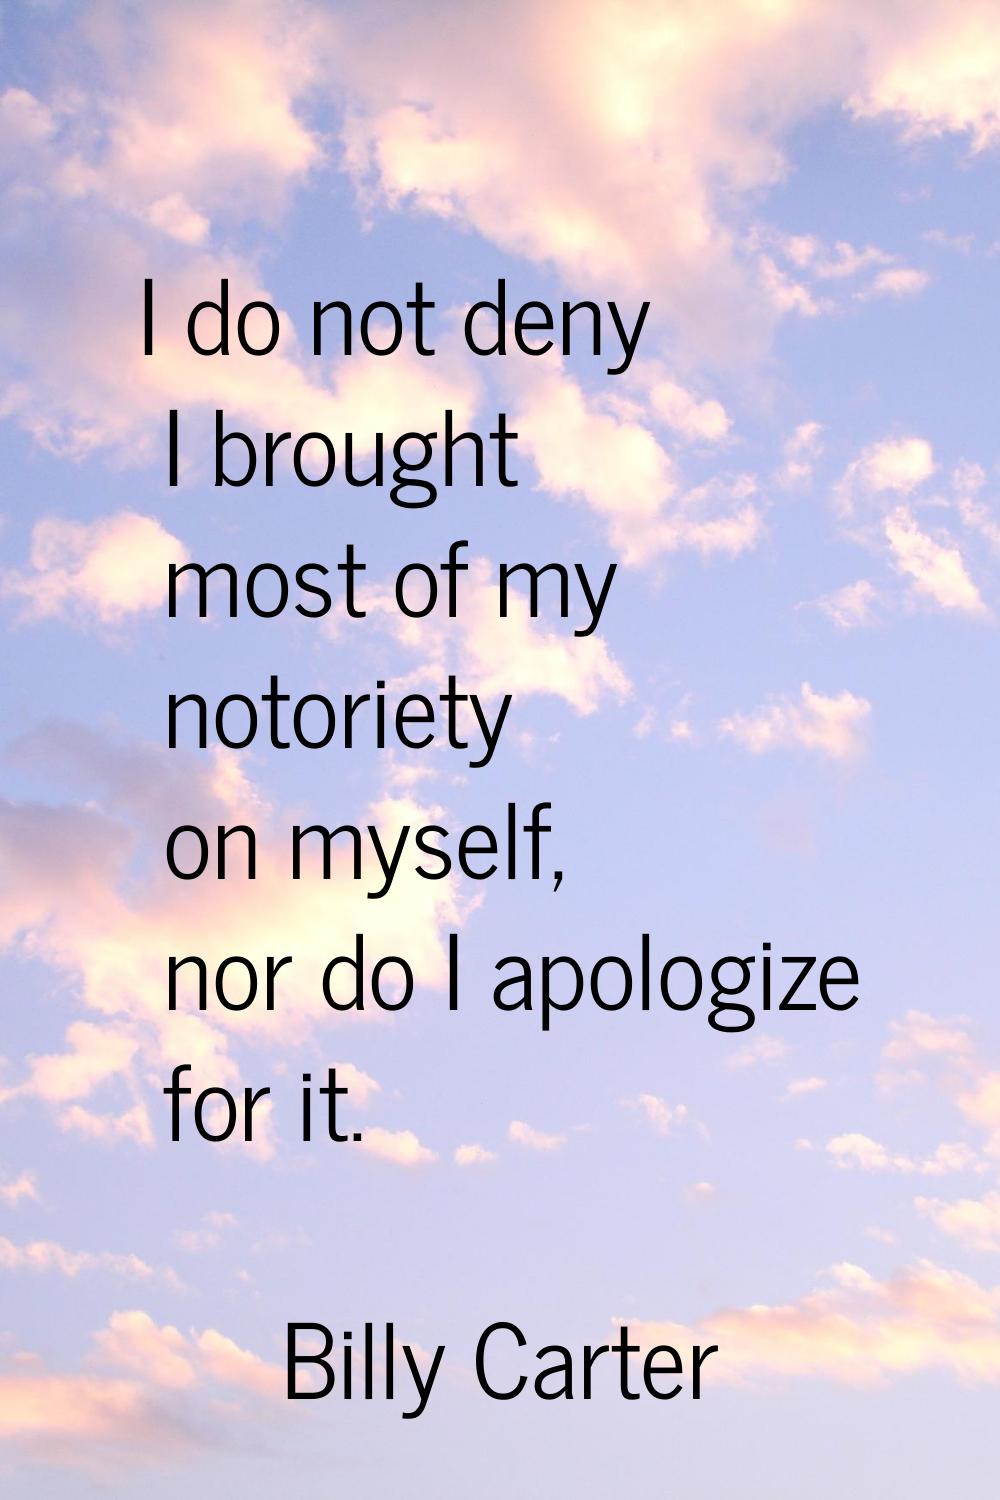 I do not deny I brought most of my notoriety on myself, nor do I apologize for it.